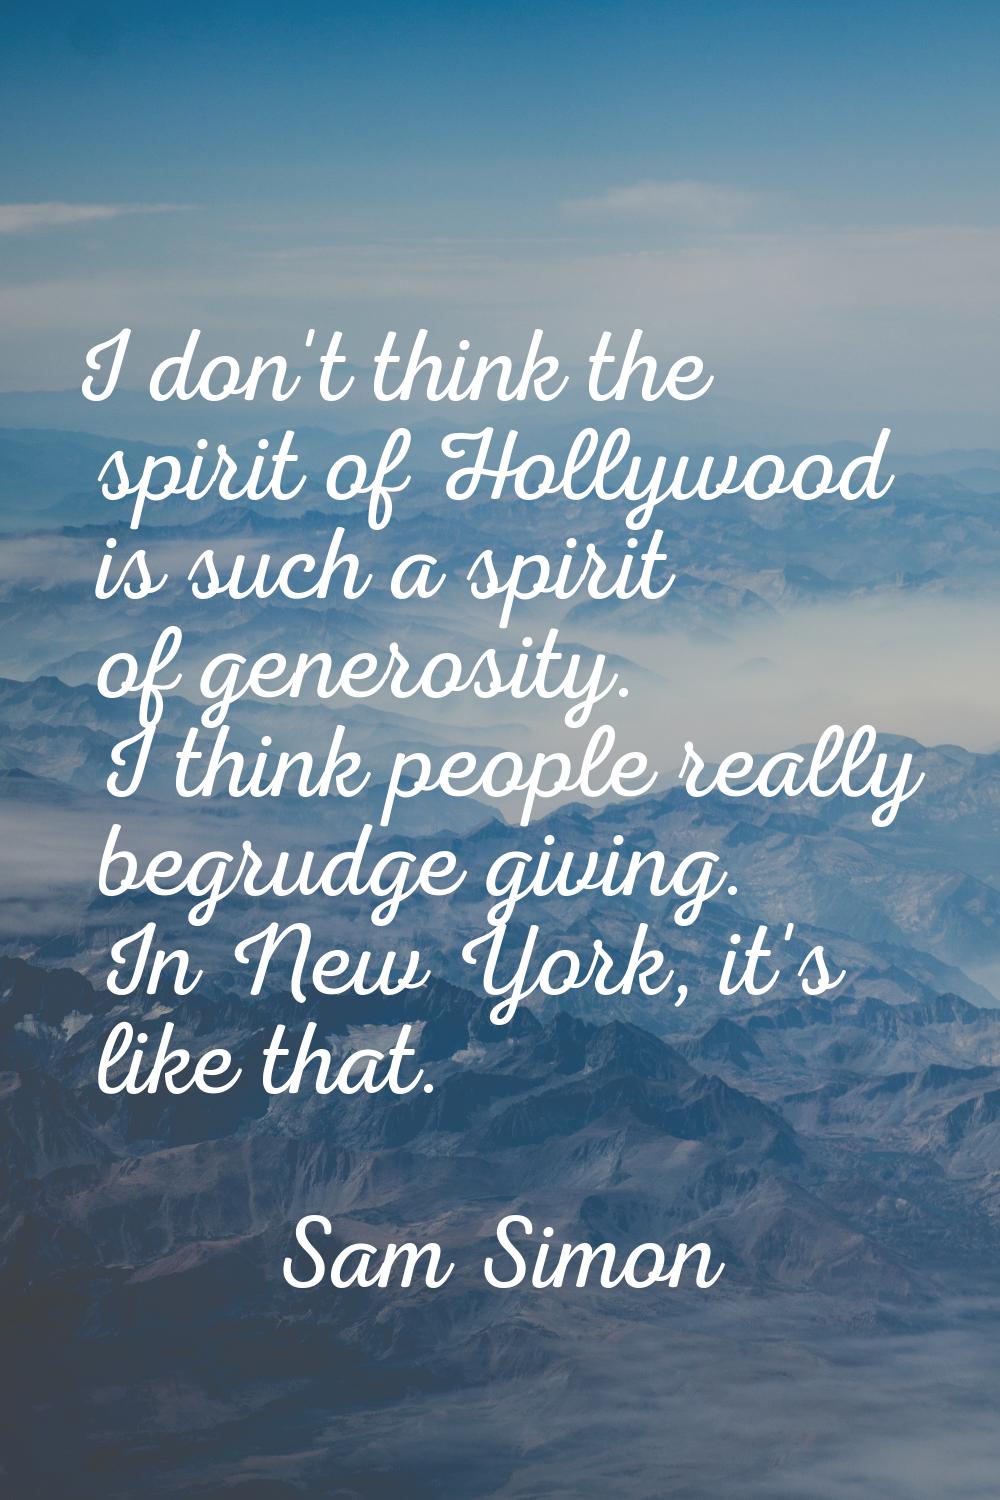 I don't think the spirit of Hollywood is such a spirit of generosity. I think people really begrudg